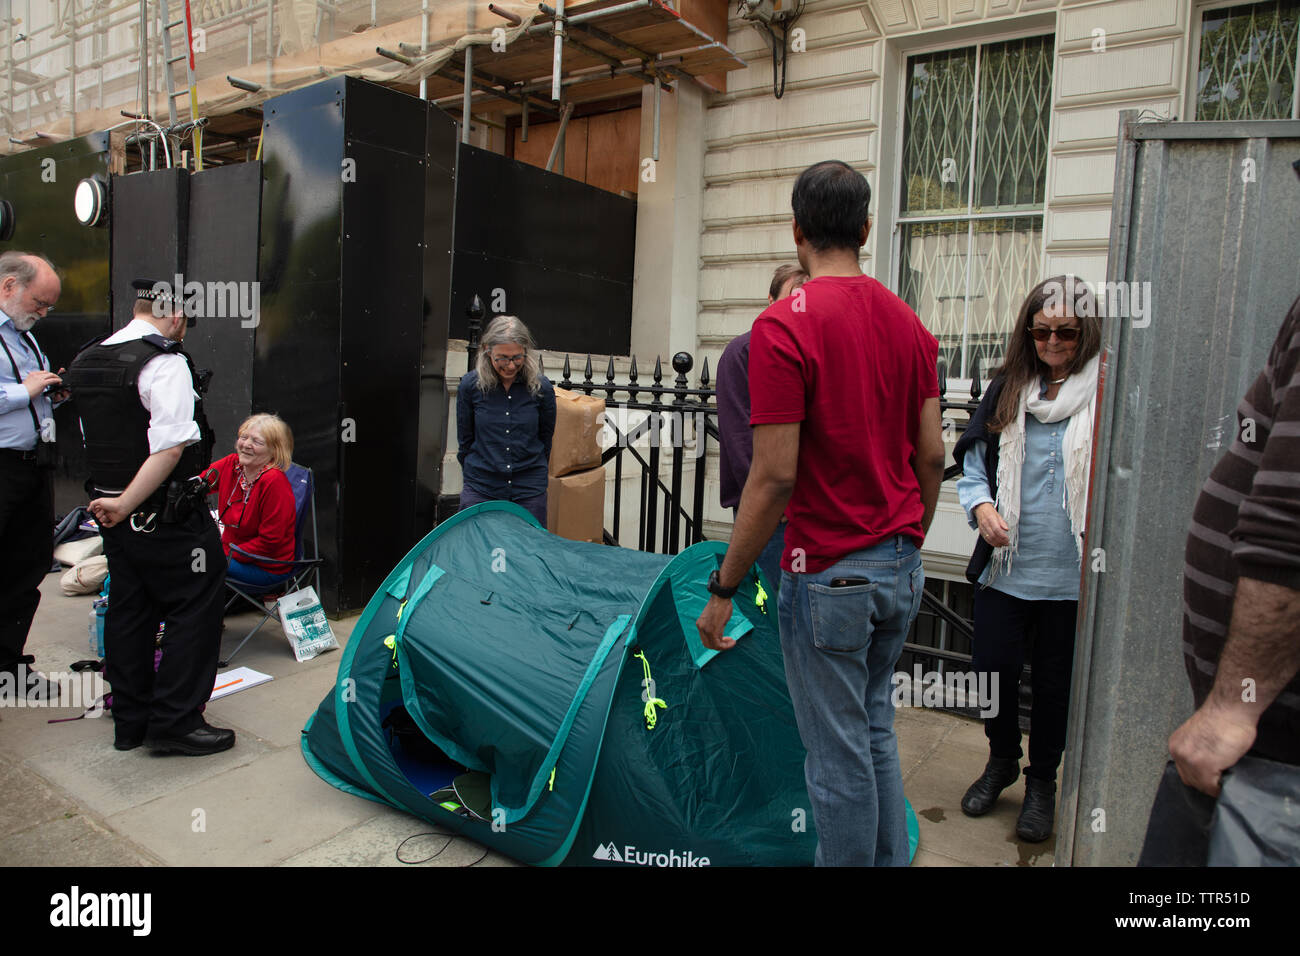 London, UK. 17th June 2019. Richard Ratcliffe on hunger strike in front of the Iranian embassy in London in protest of the detention of his wife Nazanin Zaghari in Iran over spying allegations. Richard is forced to put his tent forwards as builders are planning to pressure clean the front of the building. Credit: Joe Kuis / Alamy Stock Photo